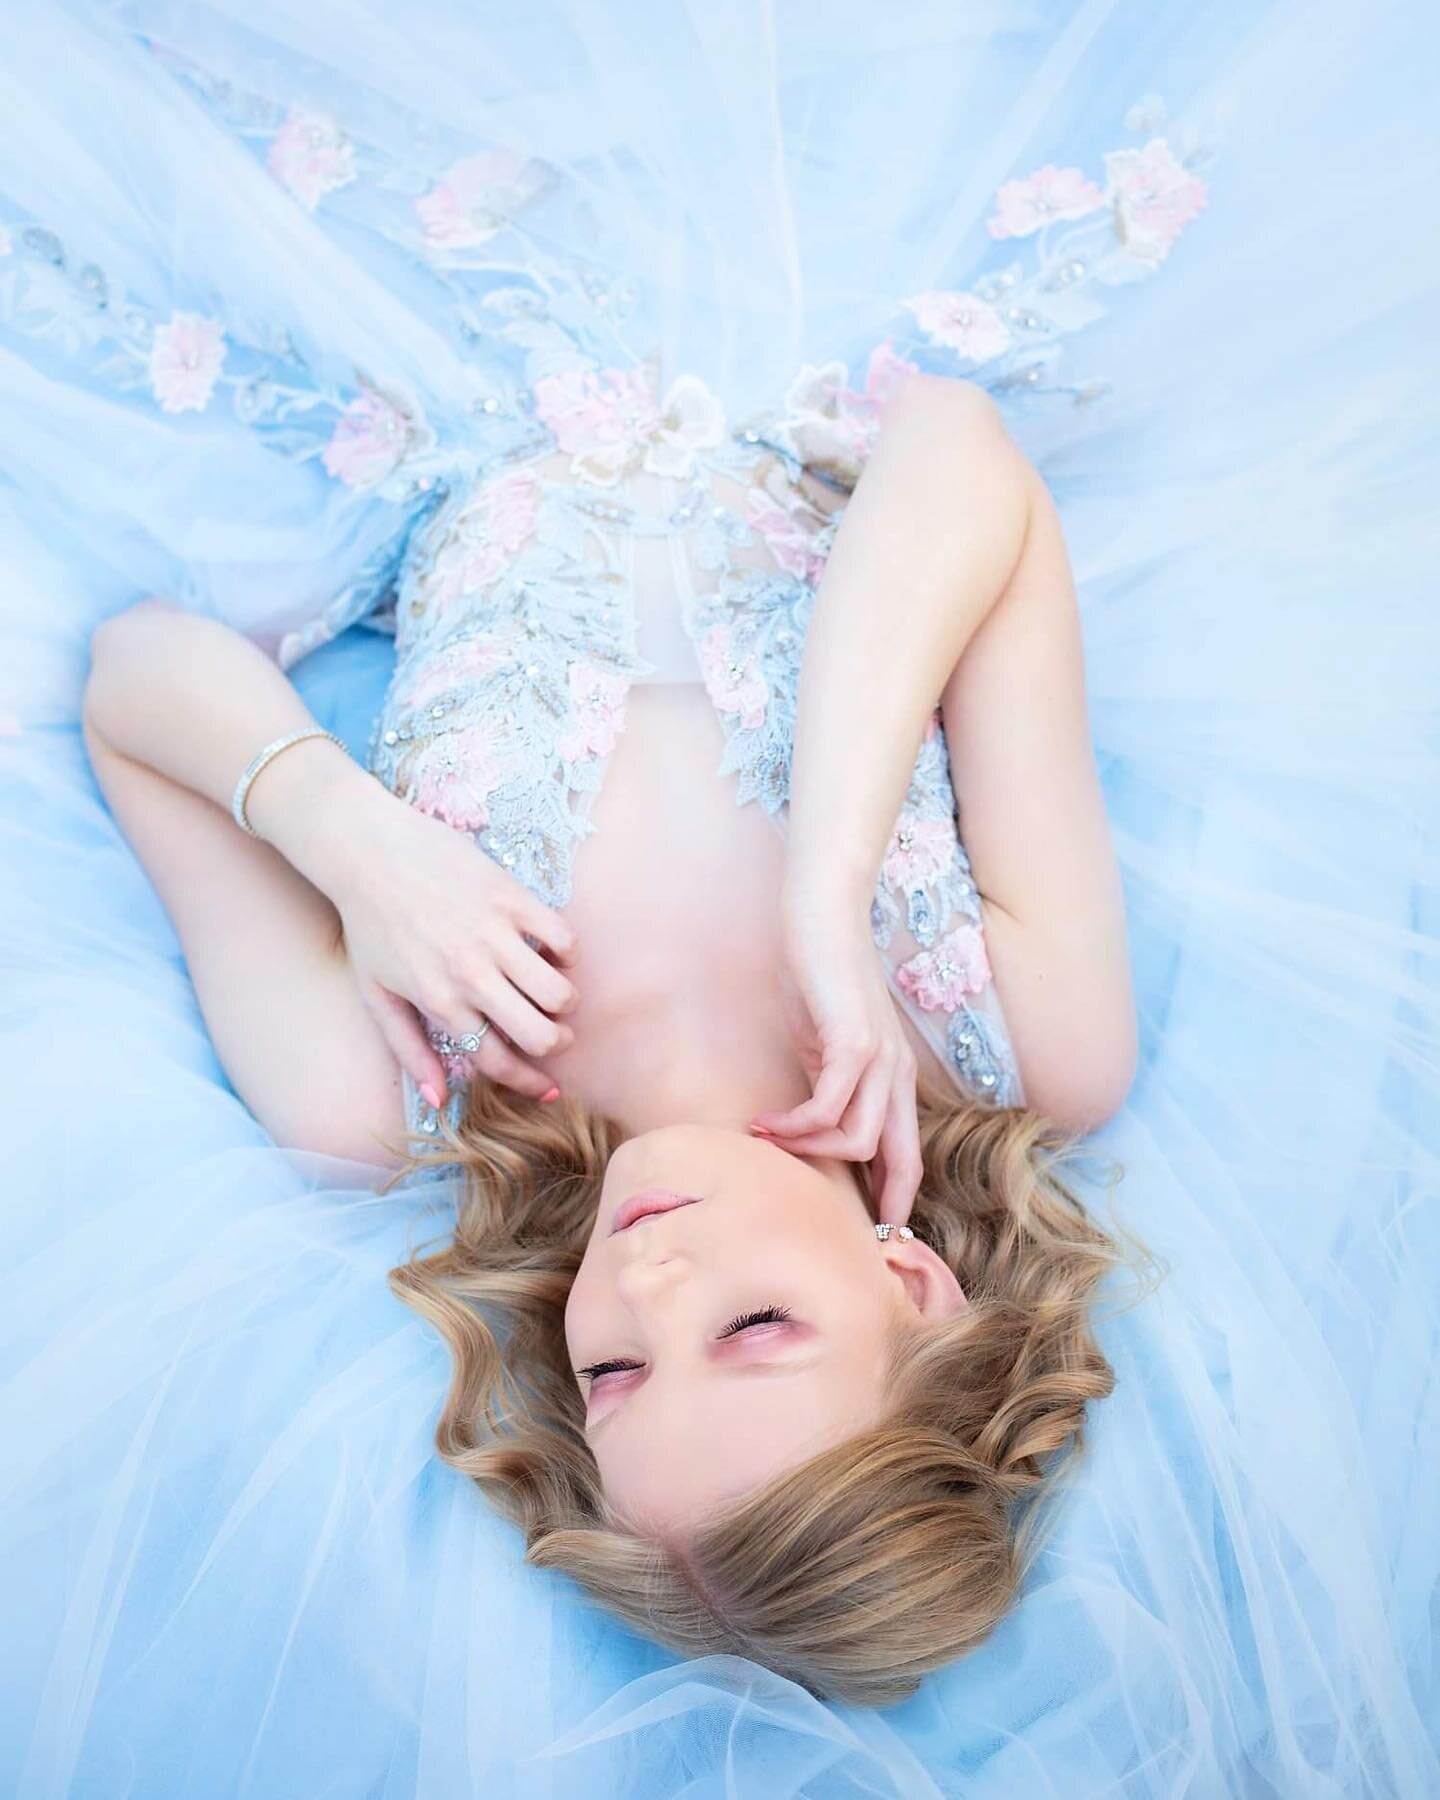 Current mood: what day is it, what time is it, what year is it, was it all a Dream? 
#dreamyaesthetic #ethereal #angelic #timetowakeup #promdress #bluetulle #fairytale #jspmuses #jamieskripacphotography #jspmuses #nwiphotographer #nwiseniorphotograph